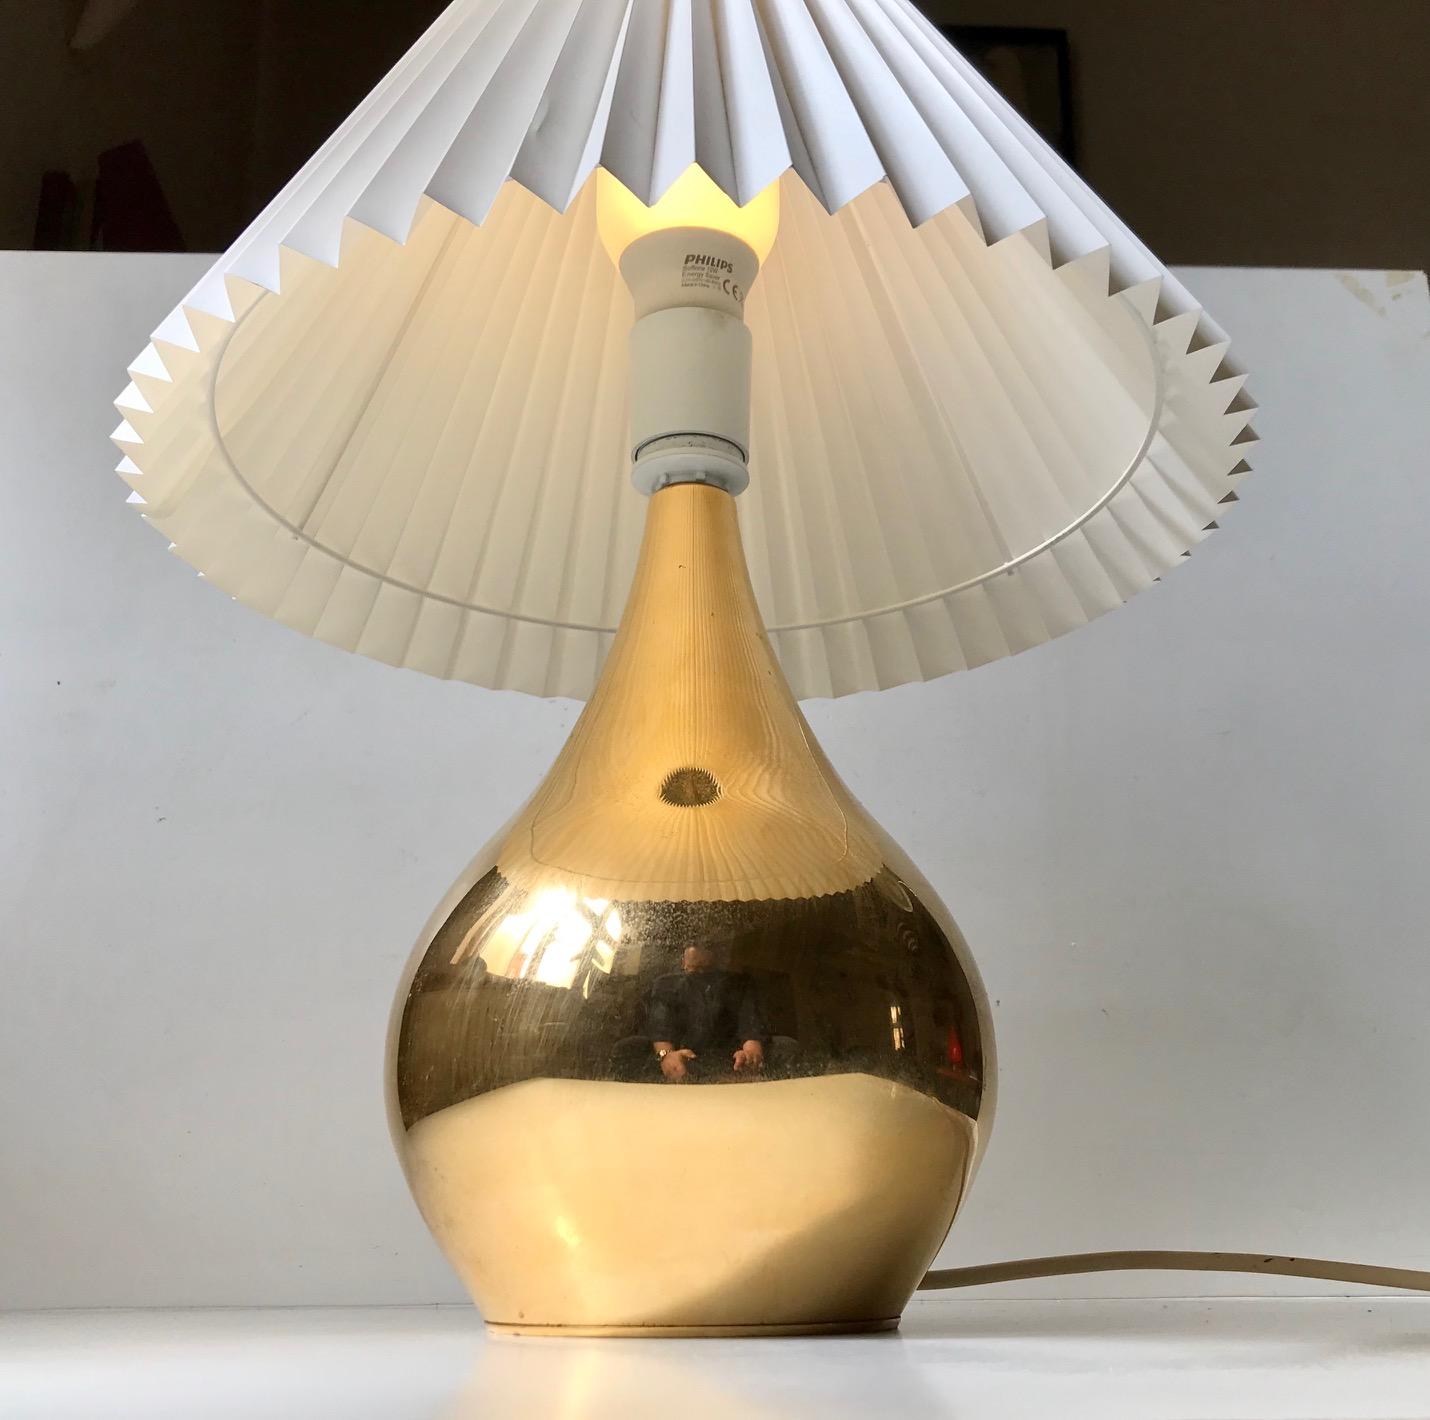 A rare rather monumental 24 carat gold plated table light in the shape of a Tear Drop. Hence its name. It was designed and manufactured during the 1960s by Hugo Asmussen in Denmark. The base/foot of the light shows ware and patina due to patination